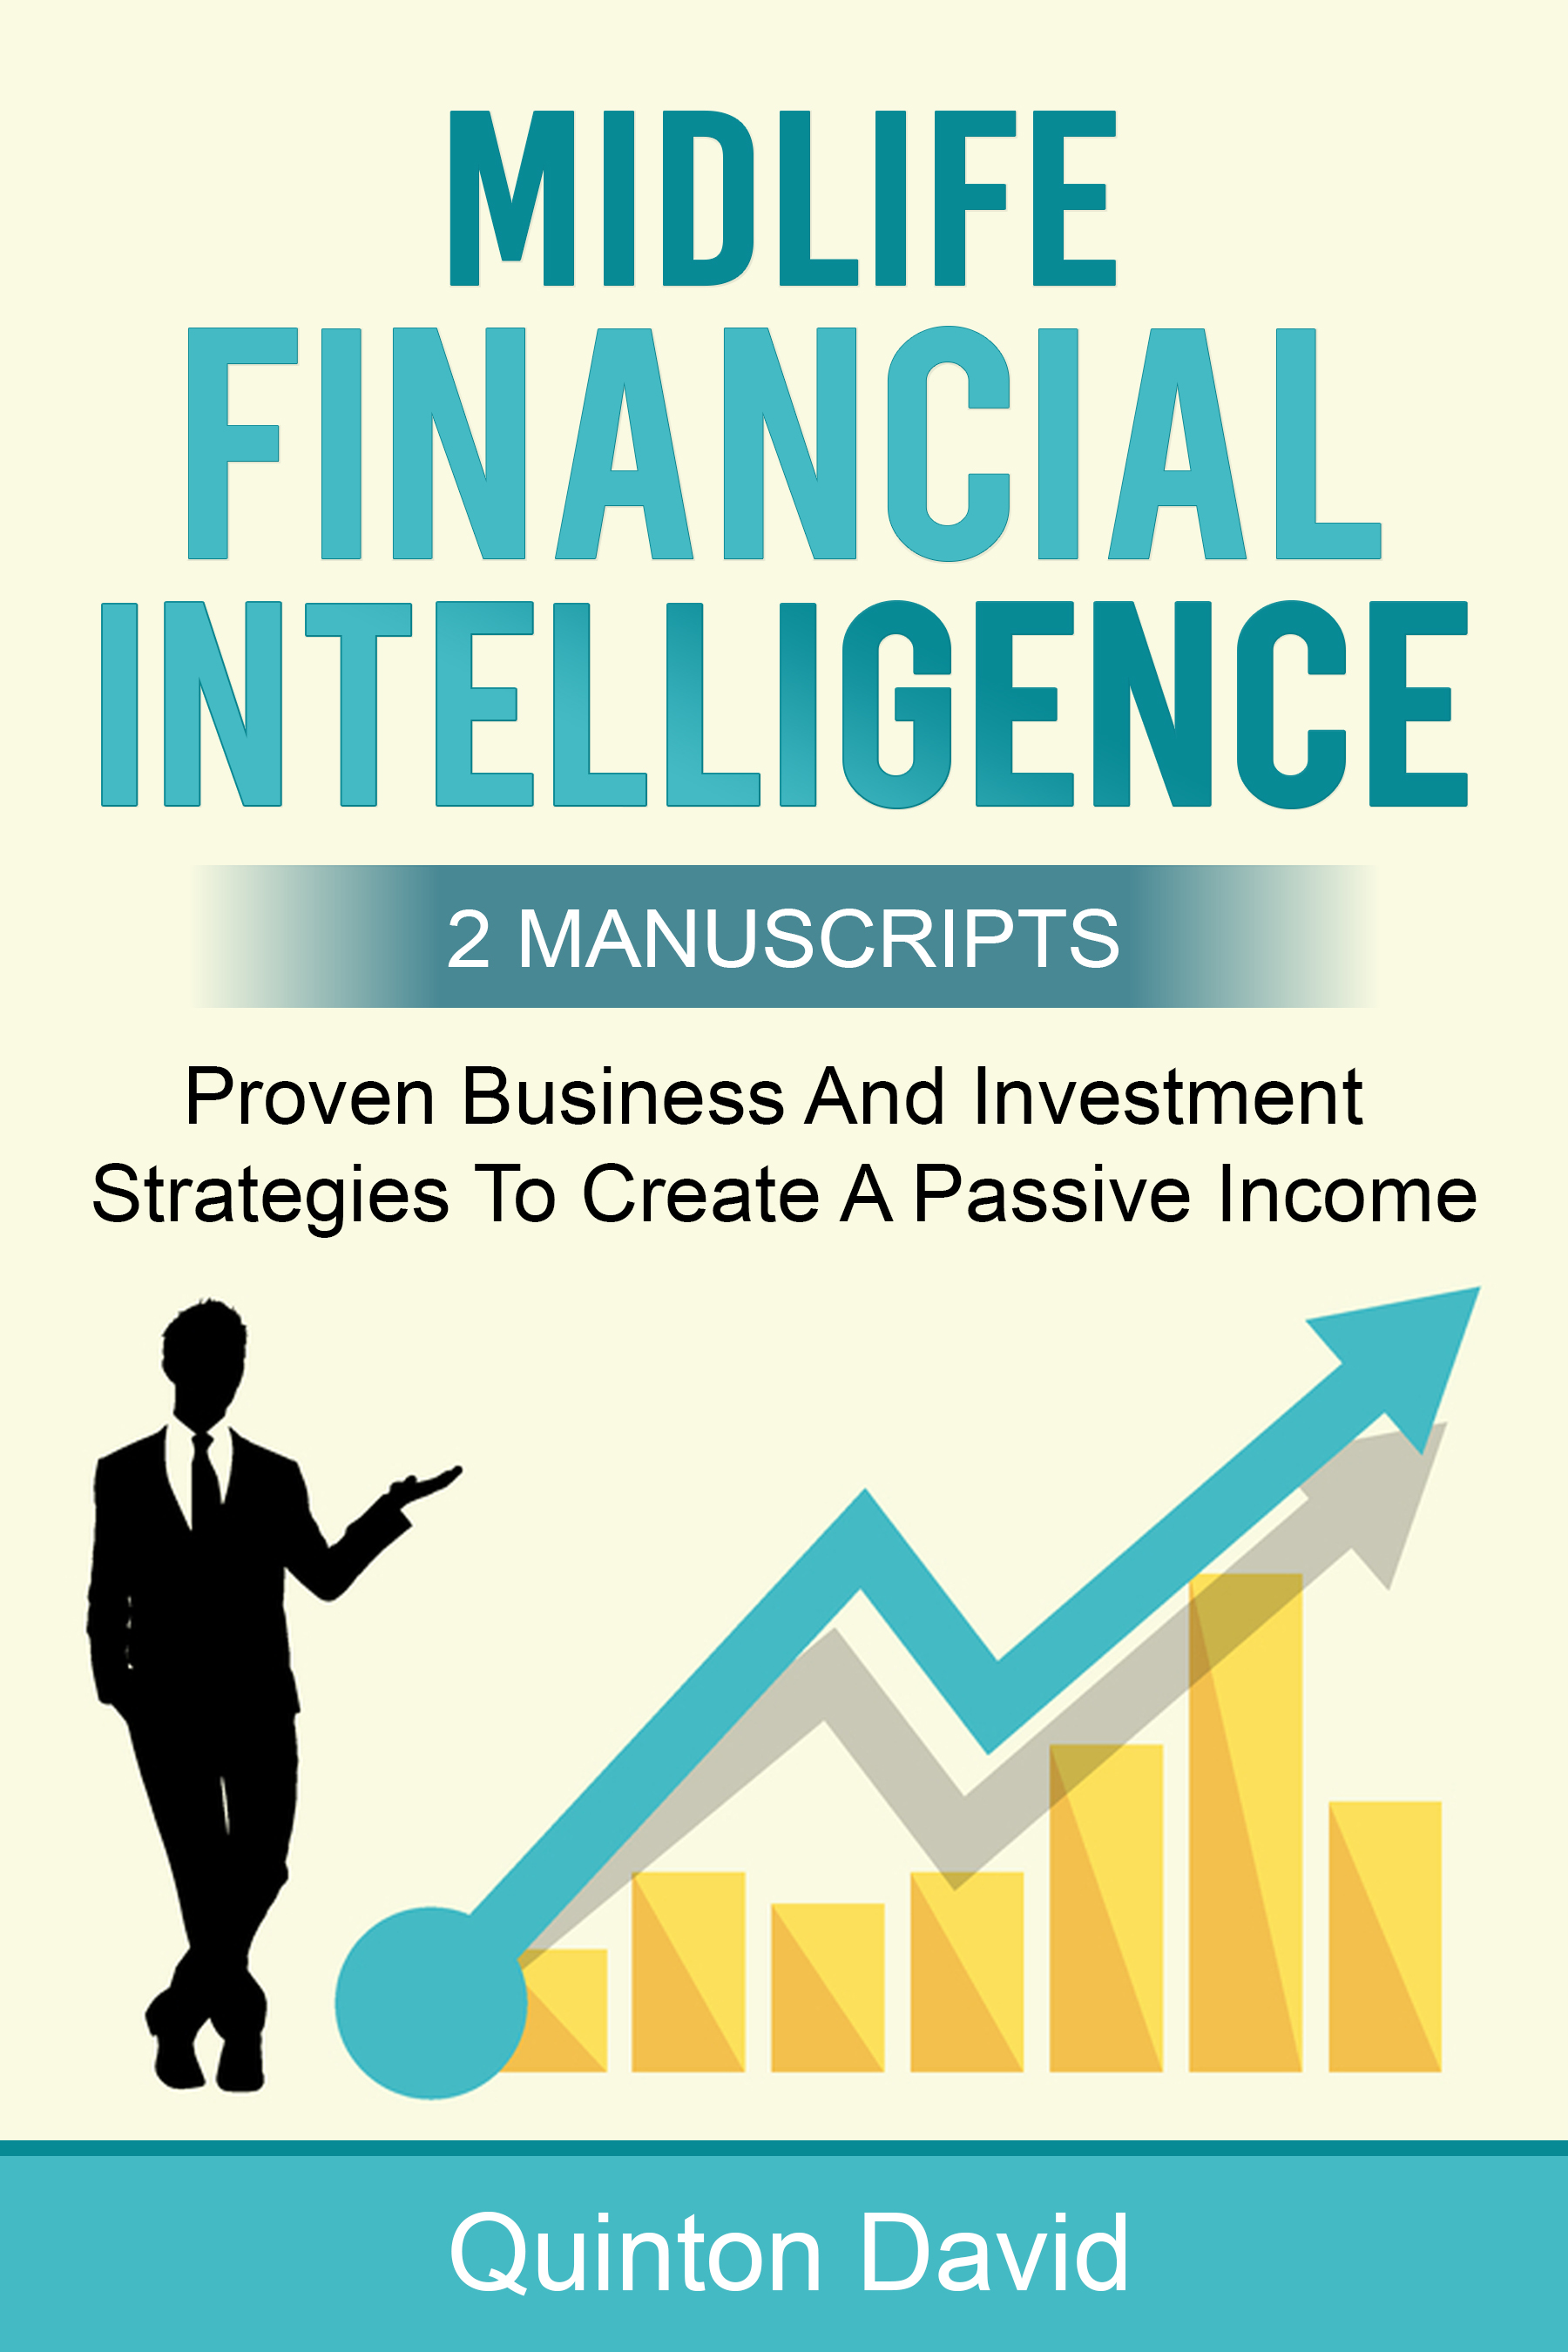 midlife-financial-intelligence-proven-business-and-investment-strategies-to-create-passive-income